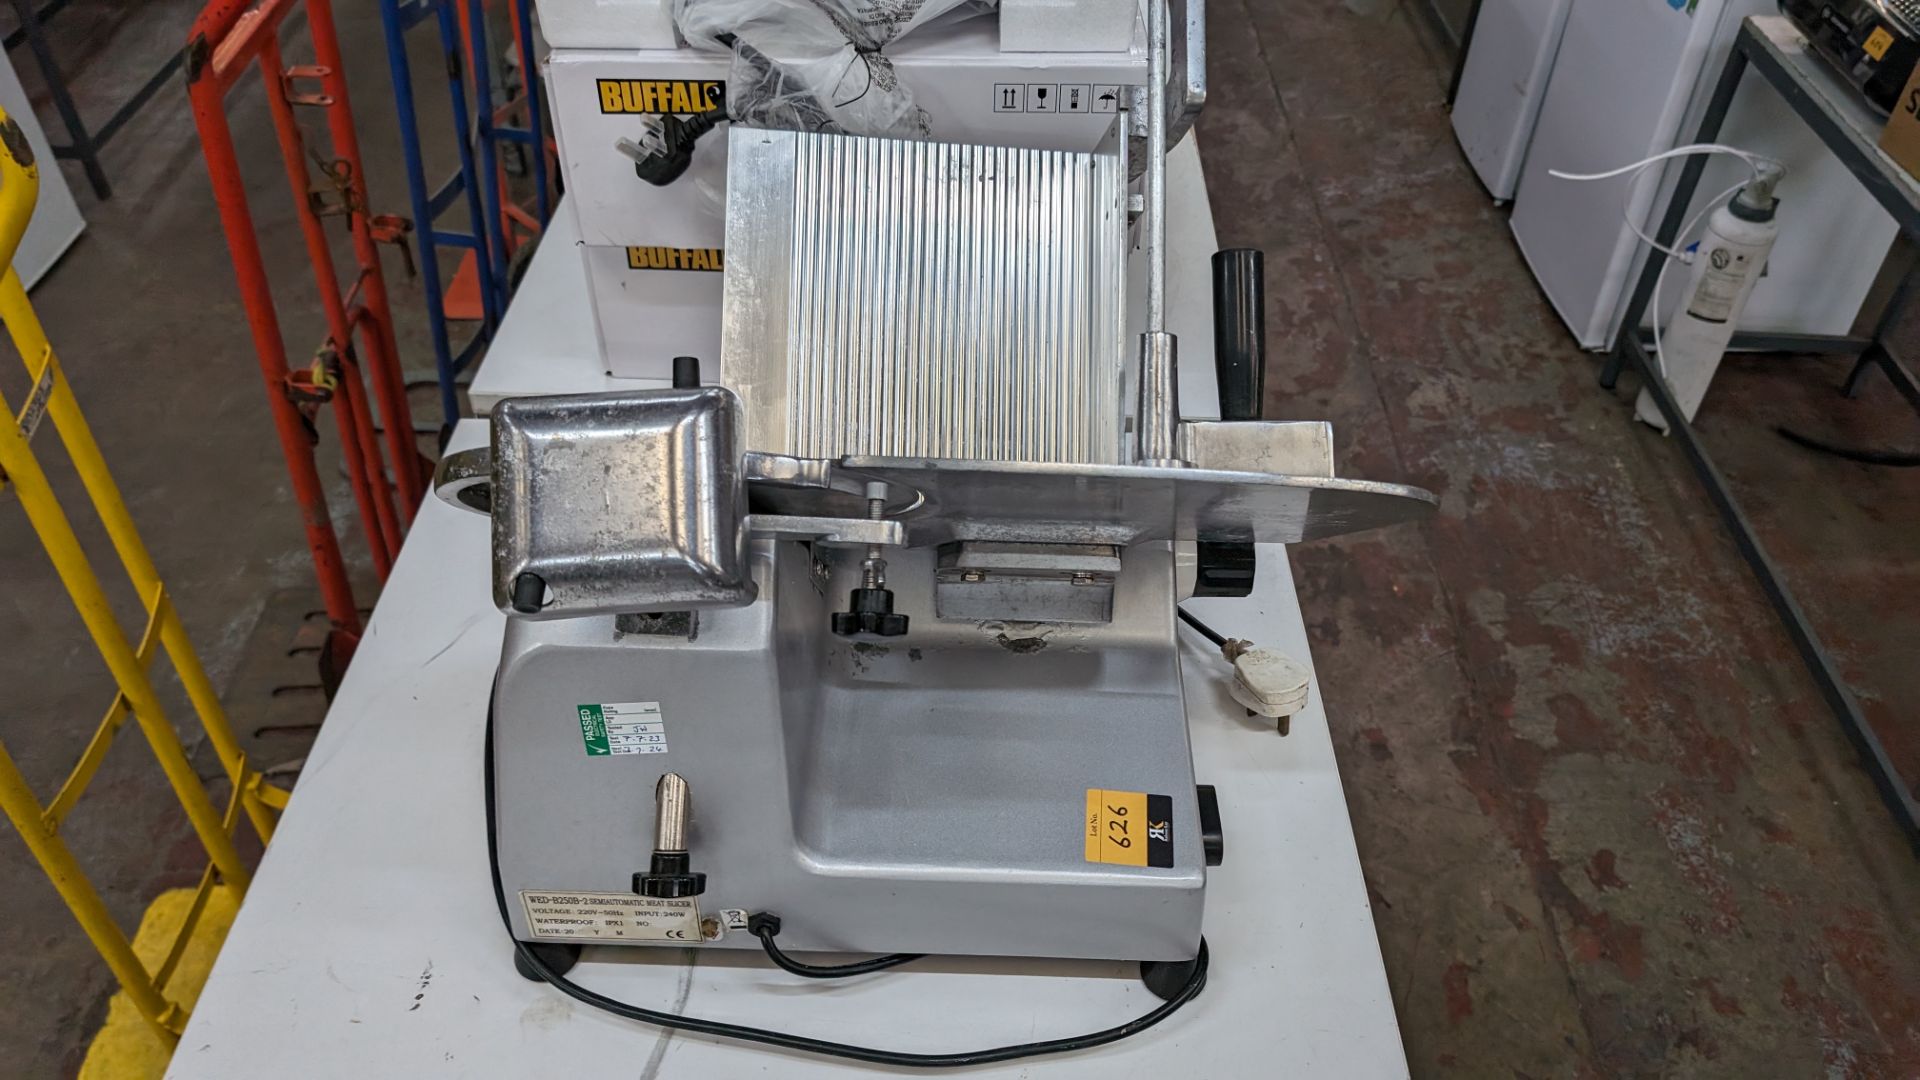 Semi-automatic meat slicer model WED-B250B-2 - Image 6 of 9